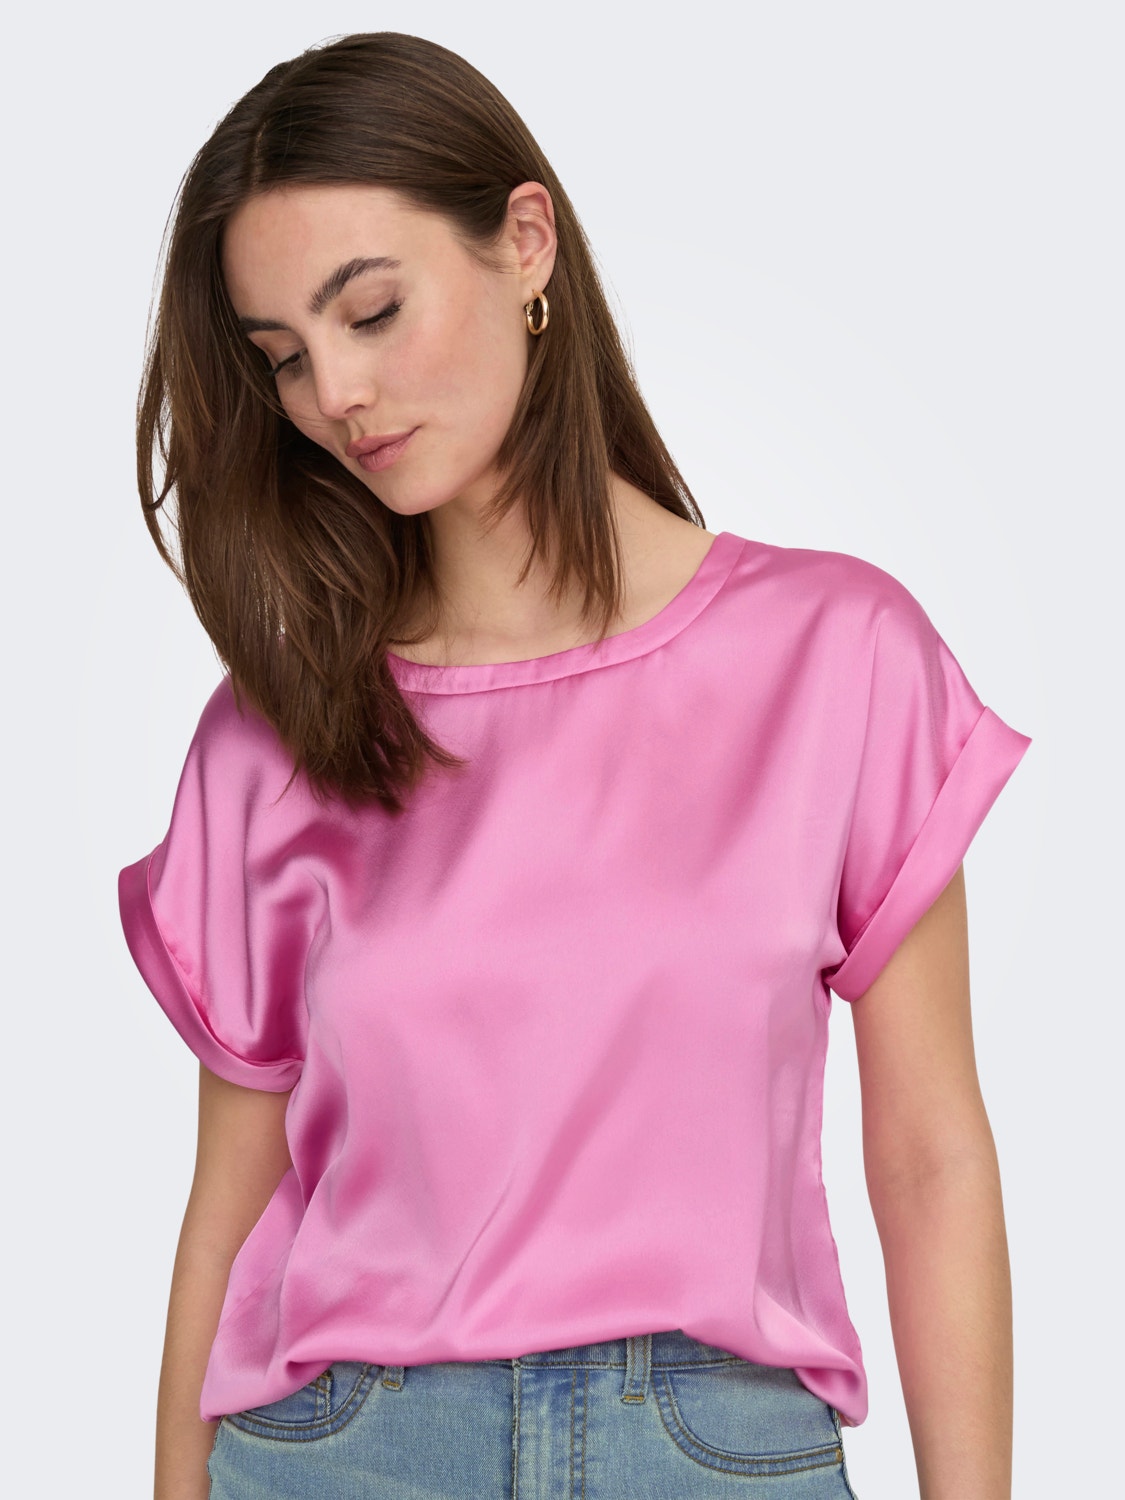 ONLY Regular fit O-hals Top -Fuchsia Pink - 15304077